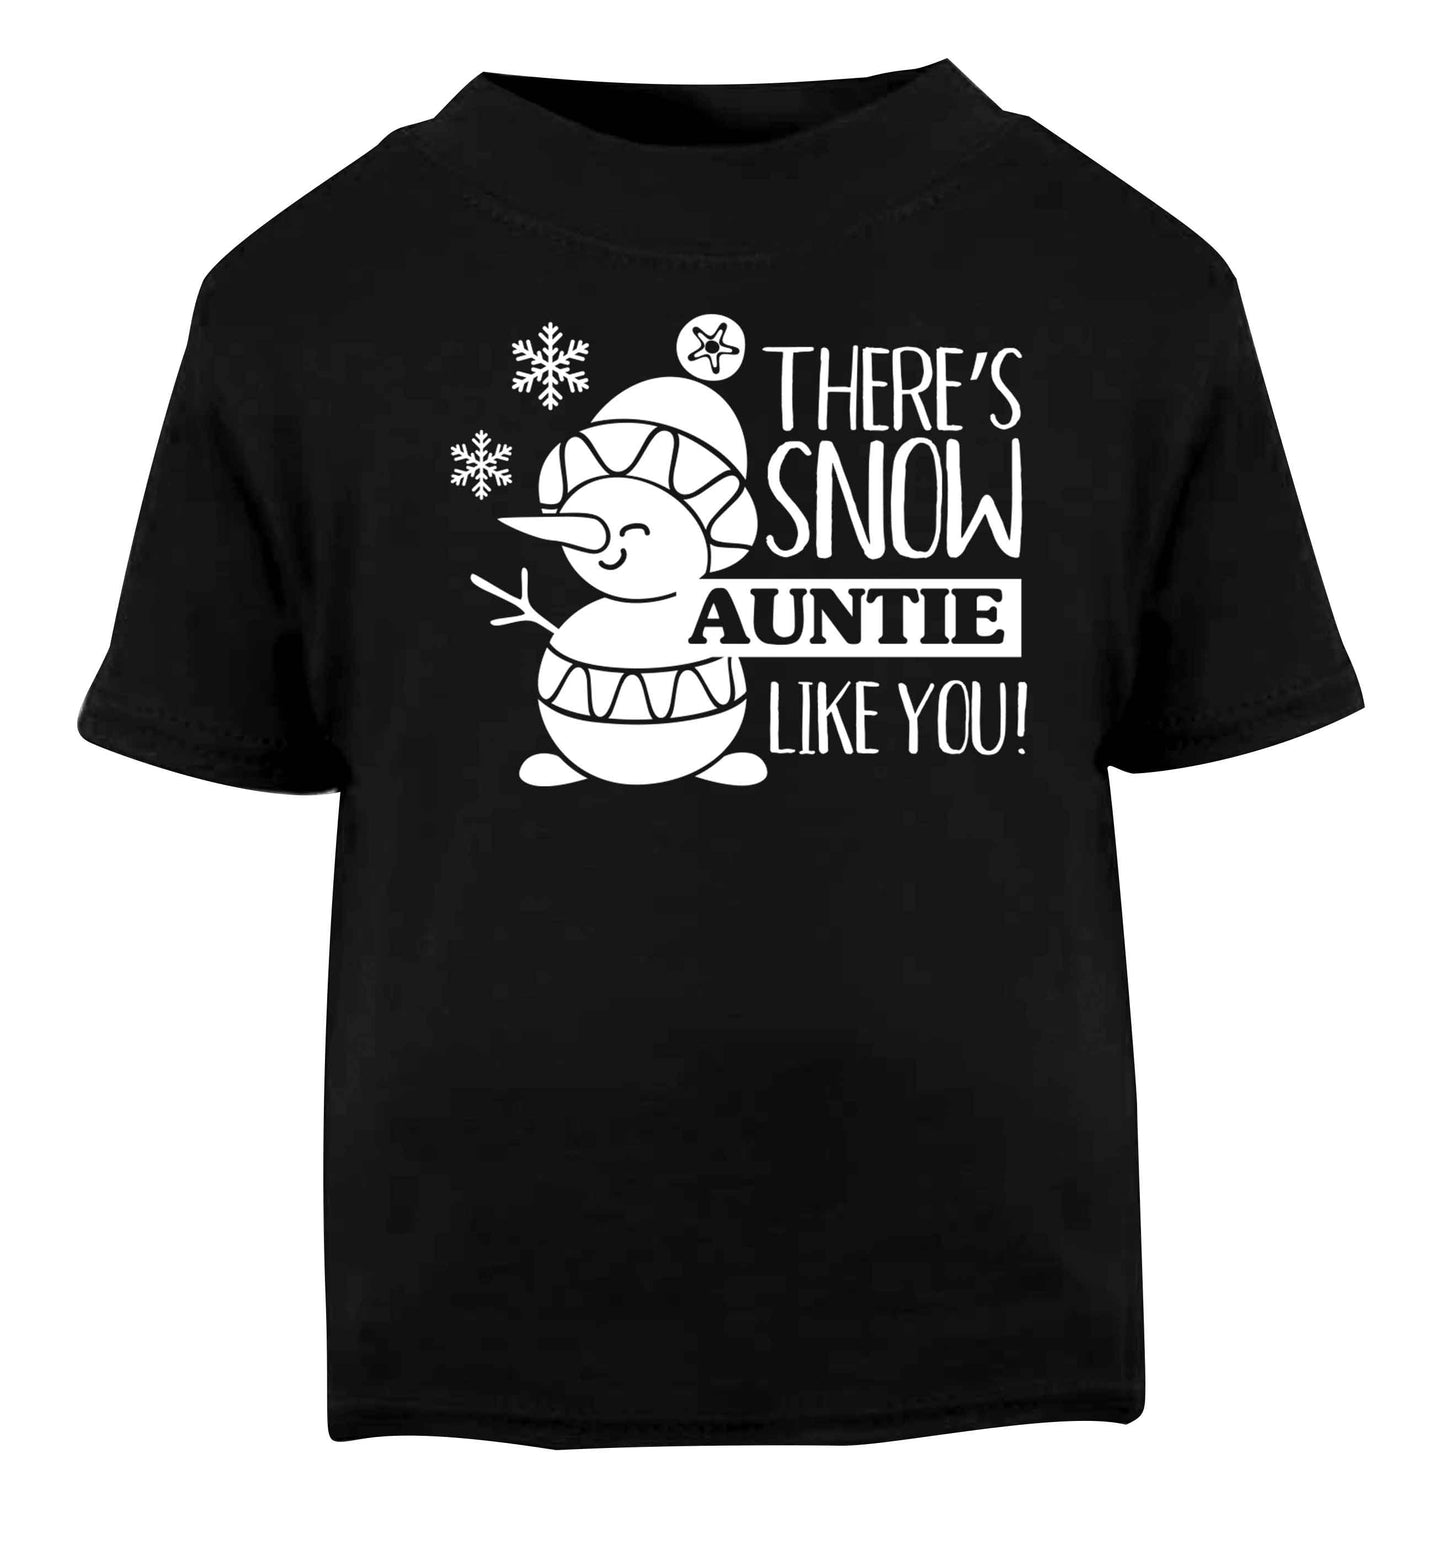 There's snow auntie like you Black baby toddler Tshirt 2 years